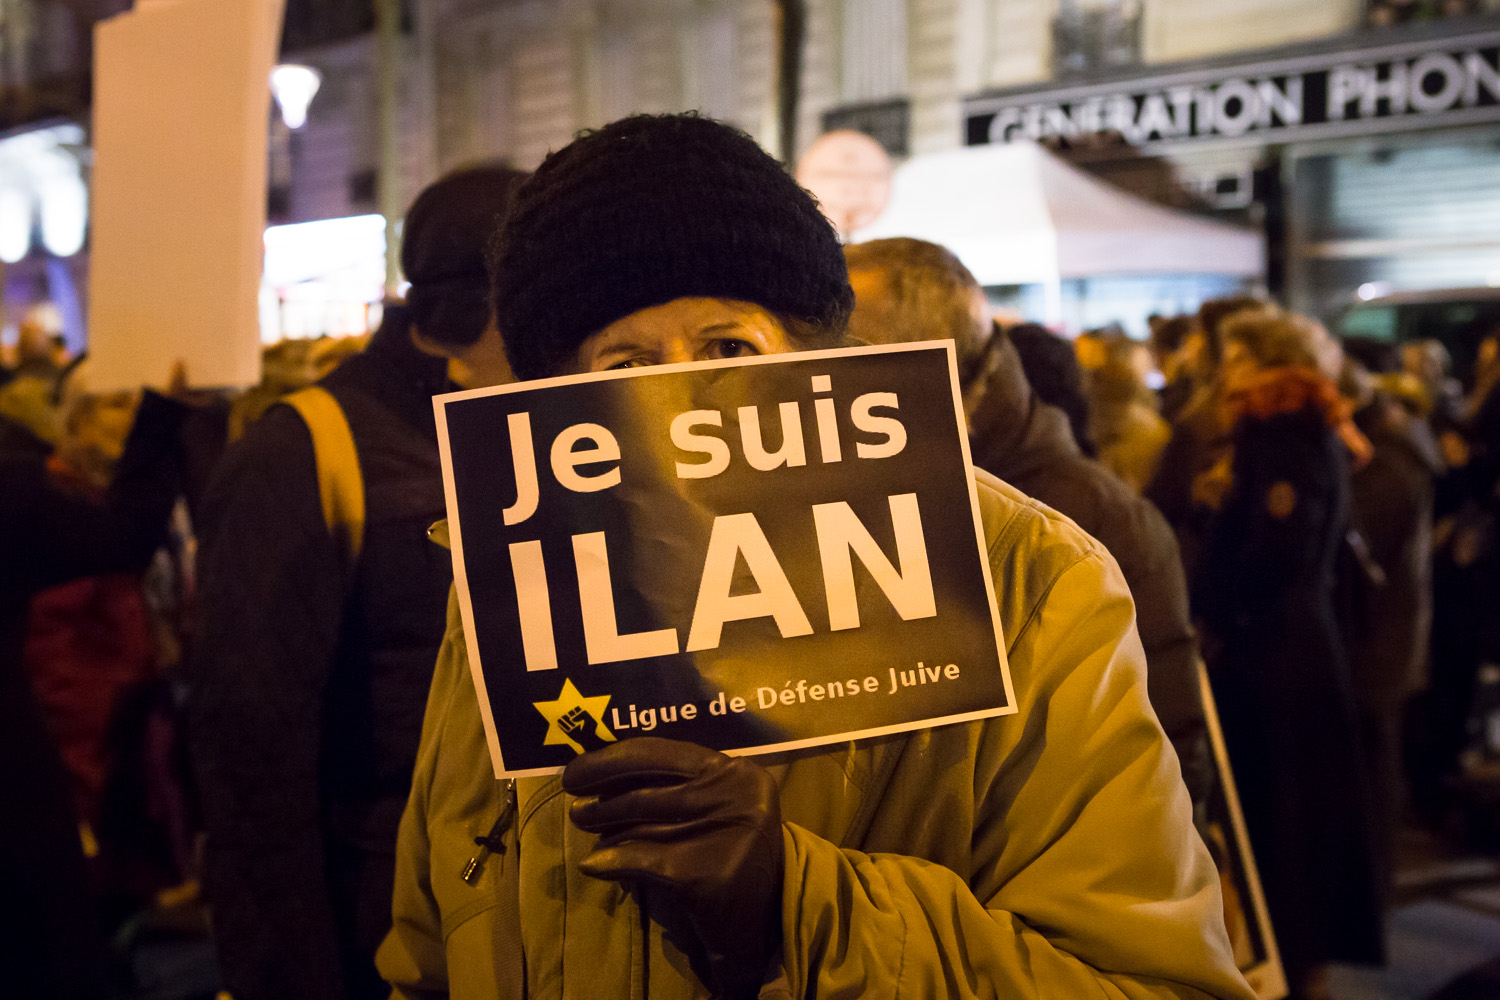  PARIS, FRANCE - FEBRUARY 12, 2015: During a „Marche silencieuse” one month after the Charlie Hebdo attacks, Jewish citizens are mourning Ilan Halimi (†2006) and the victims of radical Islamist terror attacks, such as in Toulouse in 2012, the Jewish 